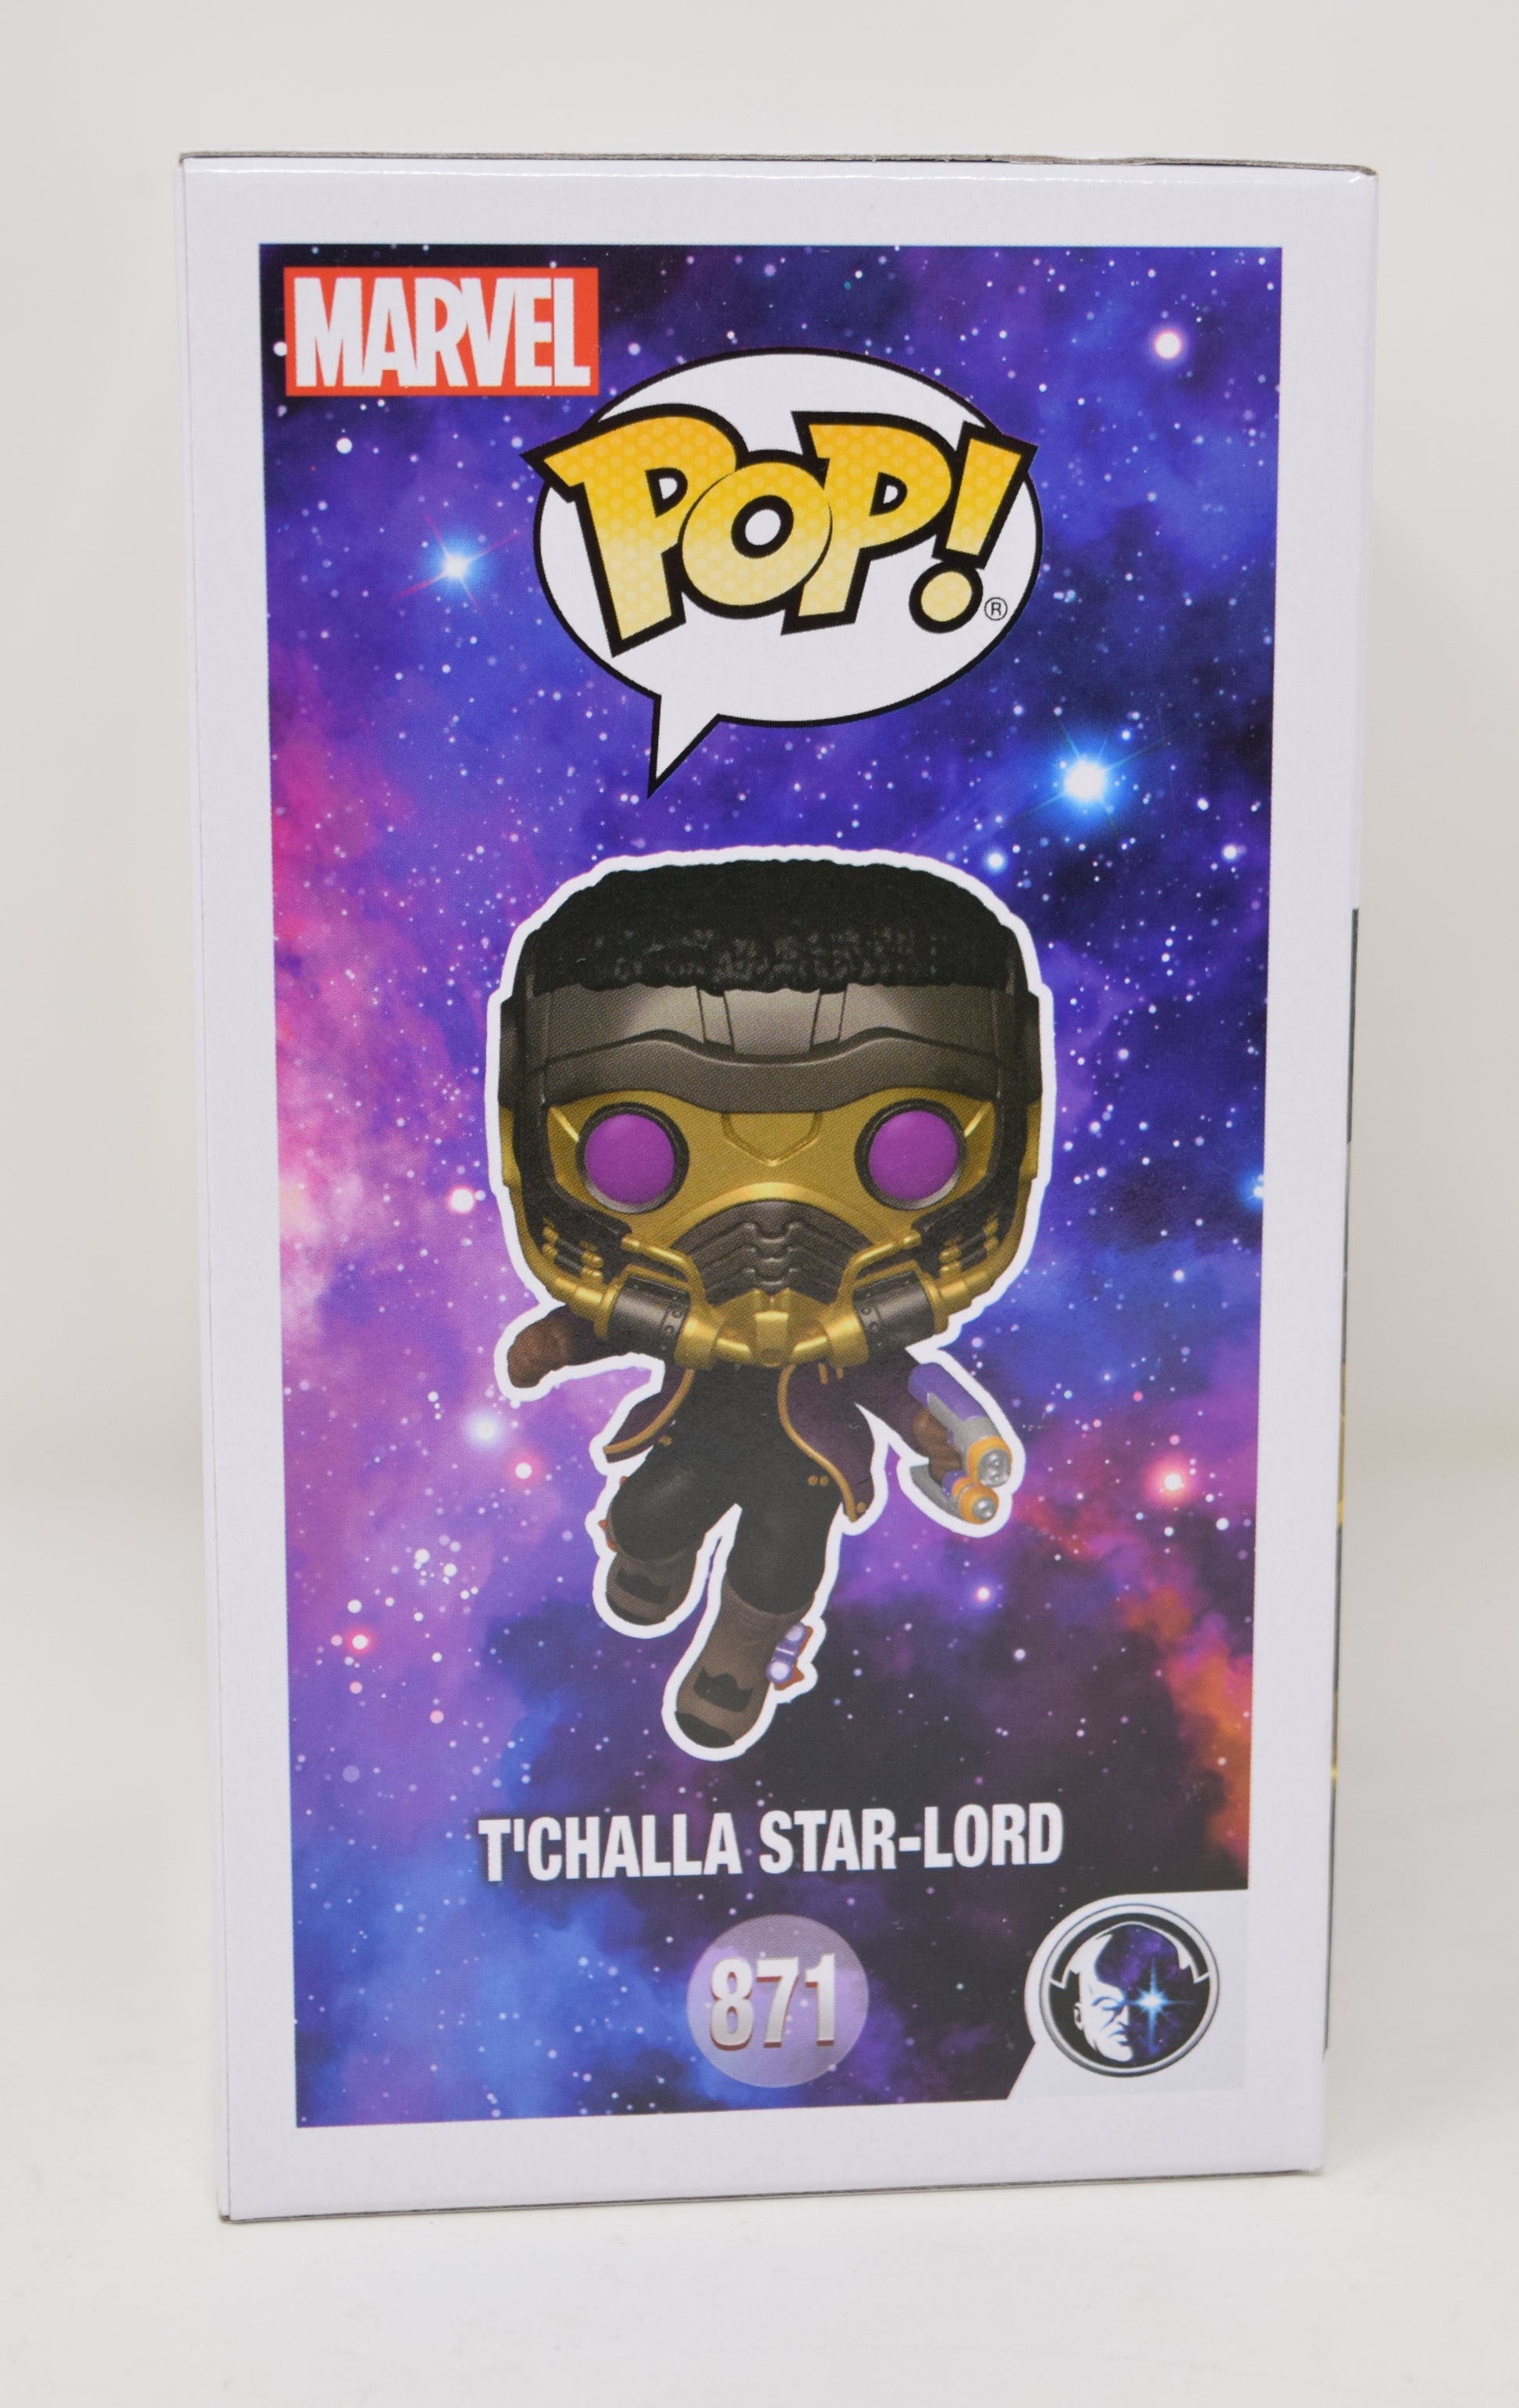 Funko POP! Marvel: What If - T'Challa Star-Lord